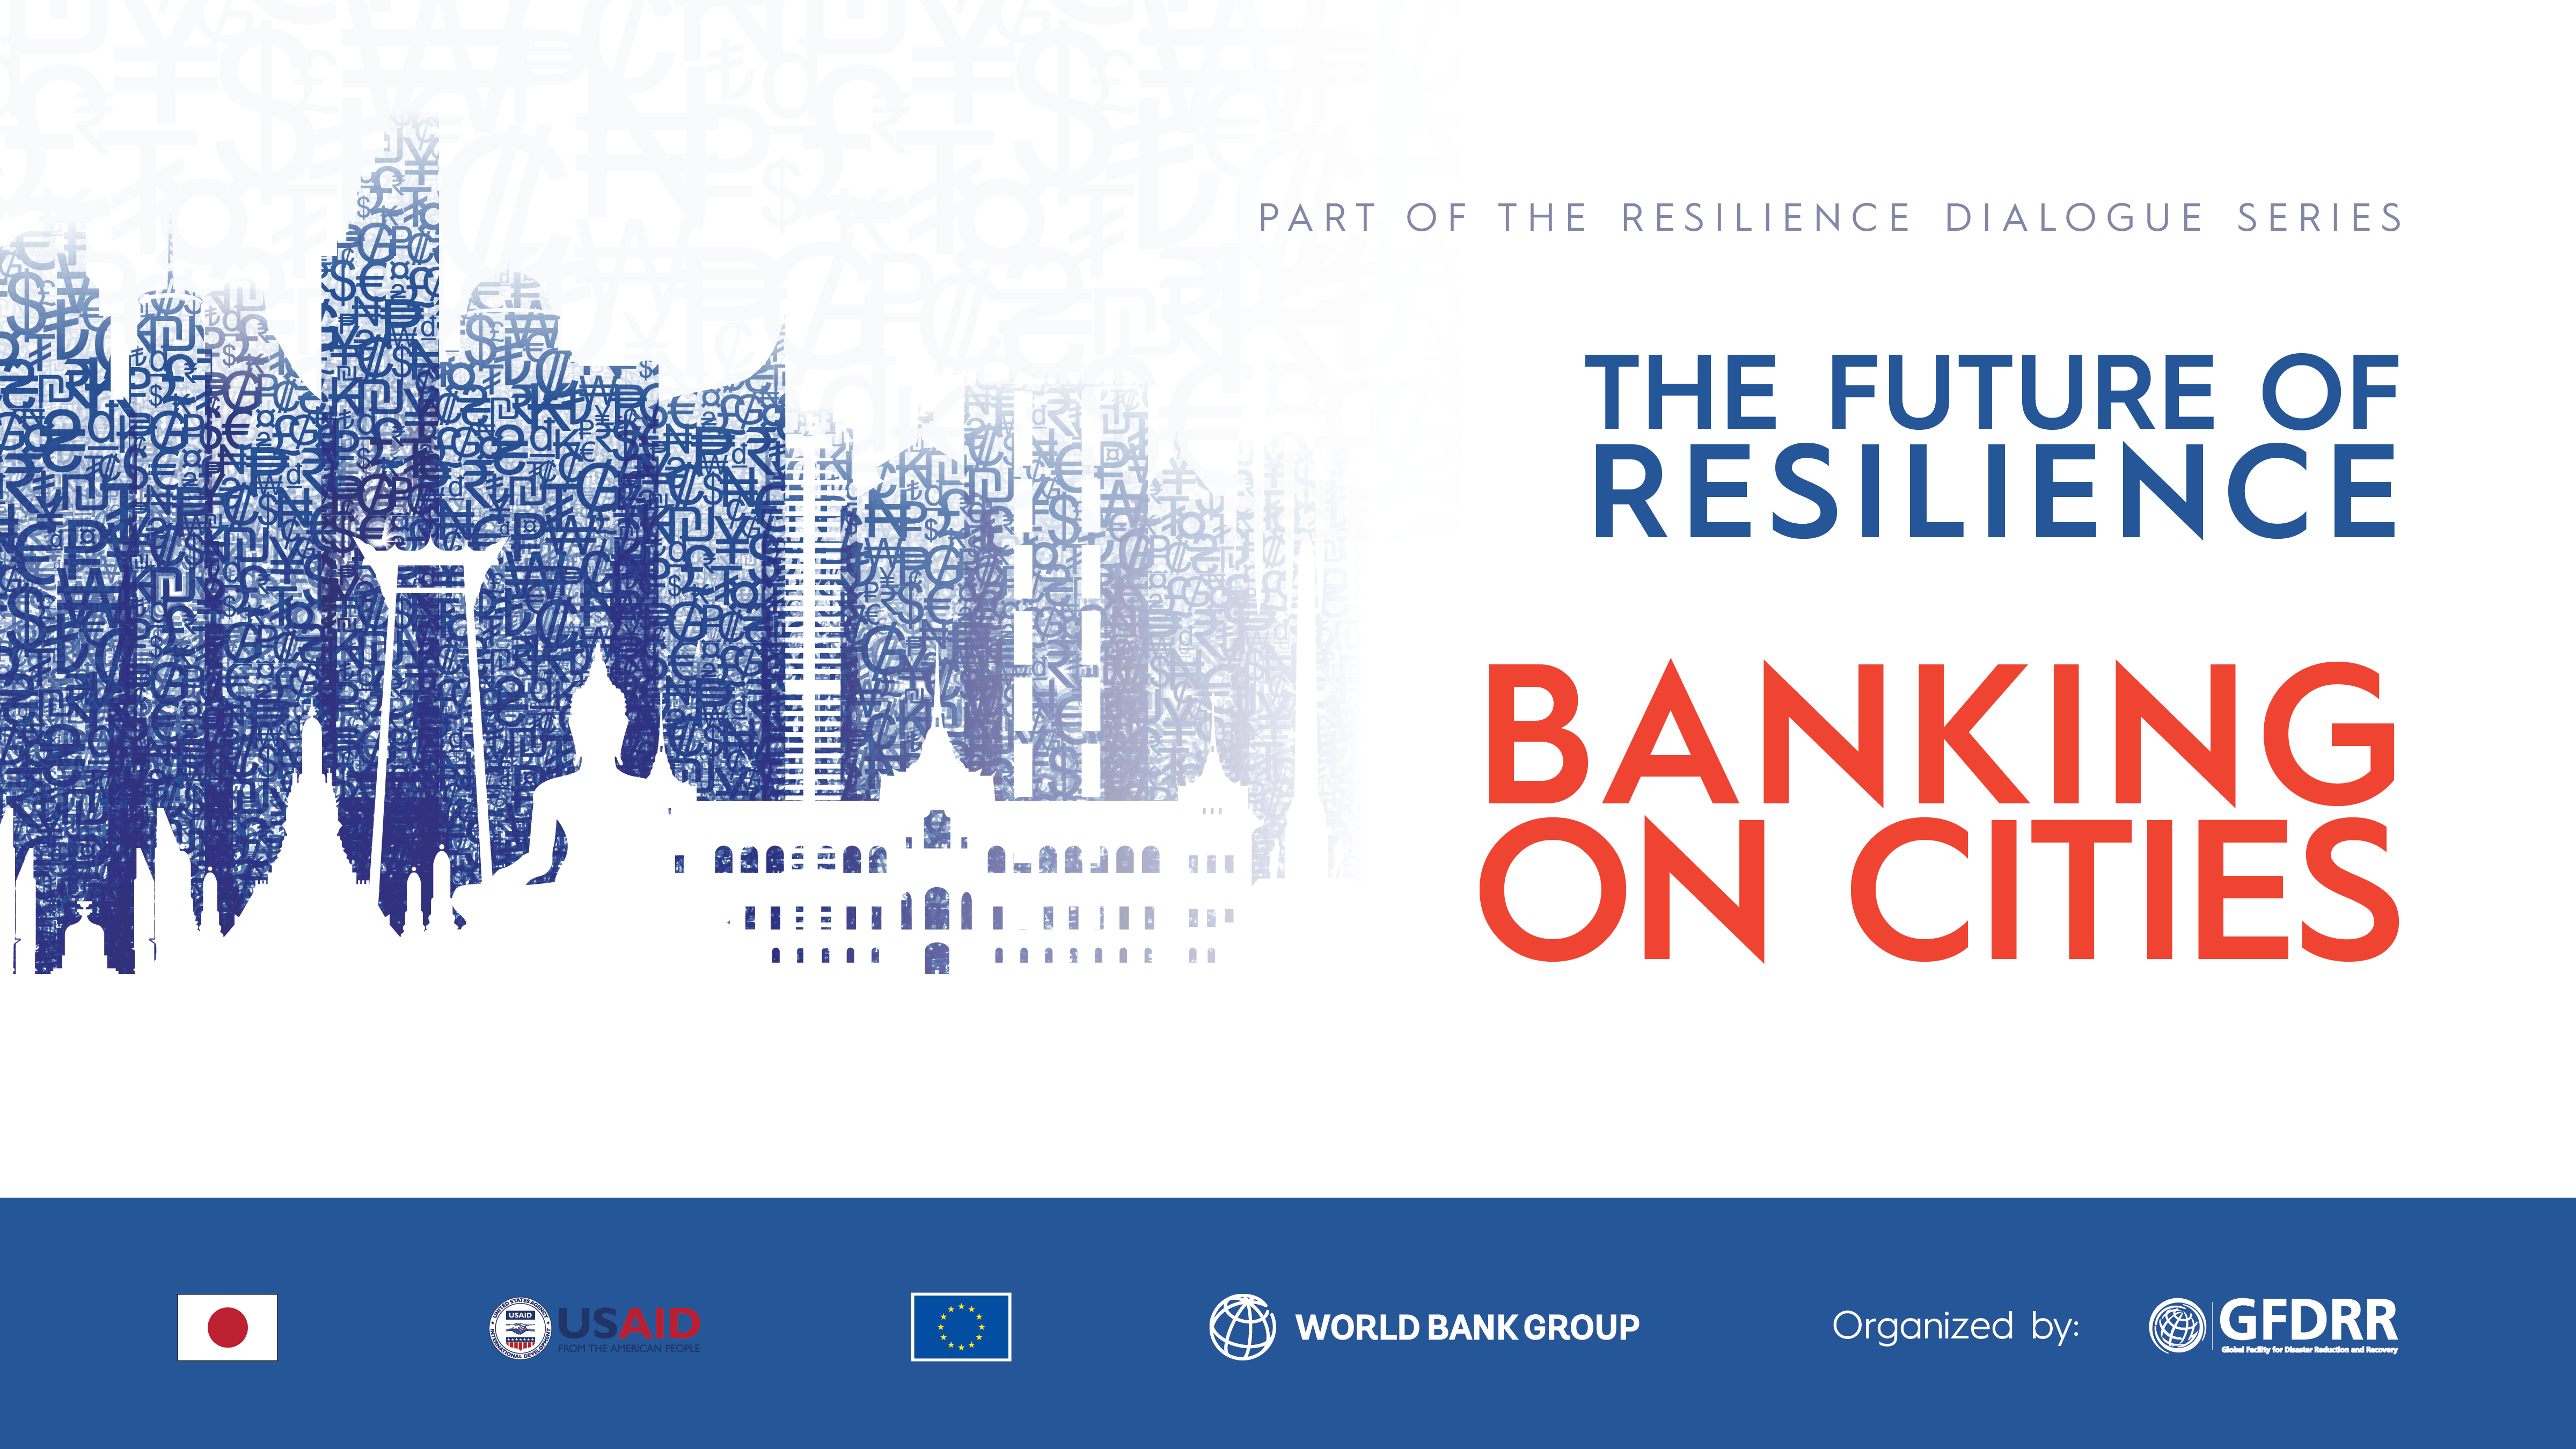 The Future of Resilience: Banking on Cities